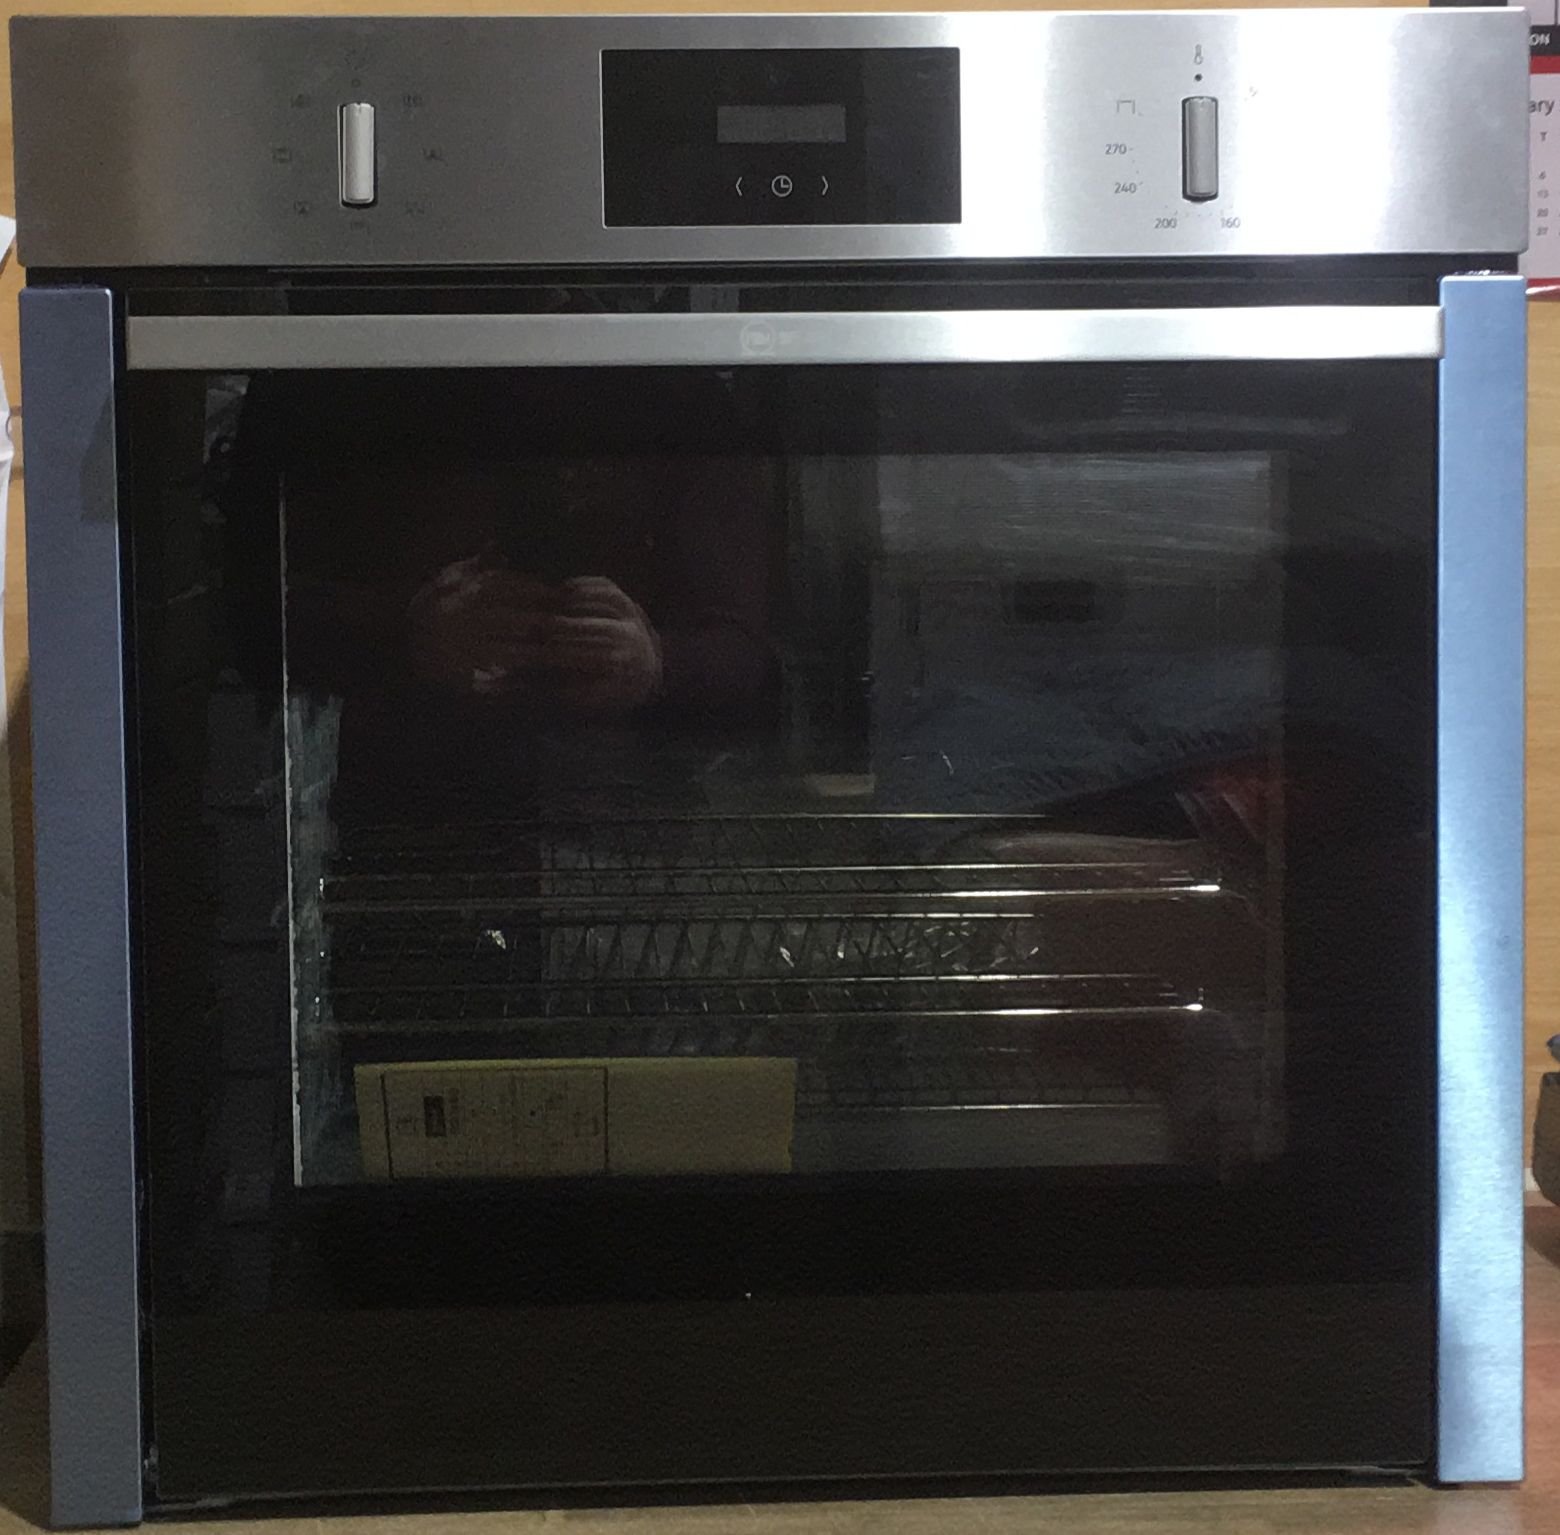 NEFF B3CCC0AN0B N30 Slide&Hide® Built In 59cm A Electric Single Oven Stainless